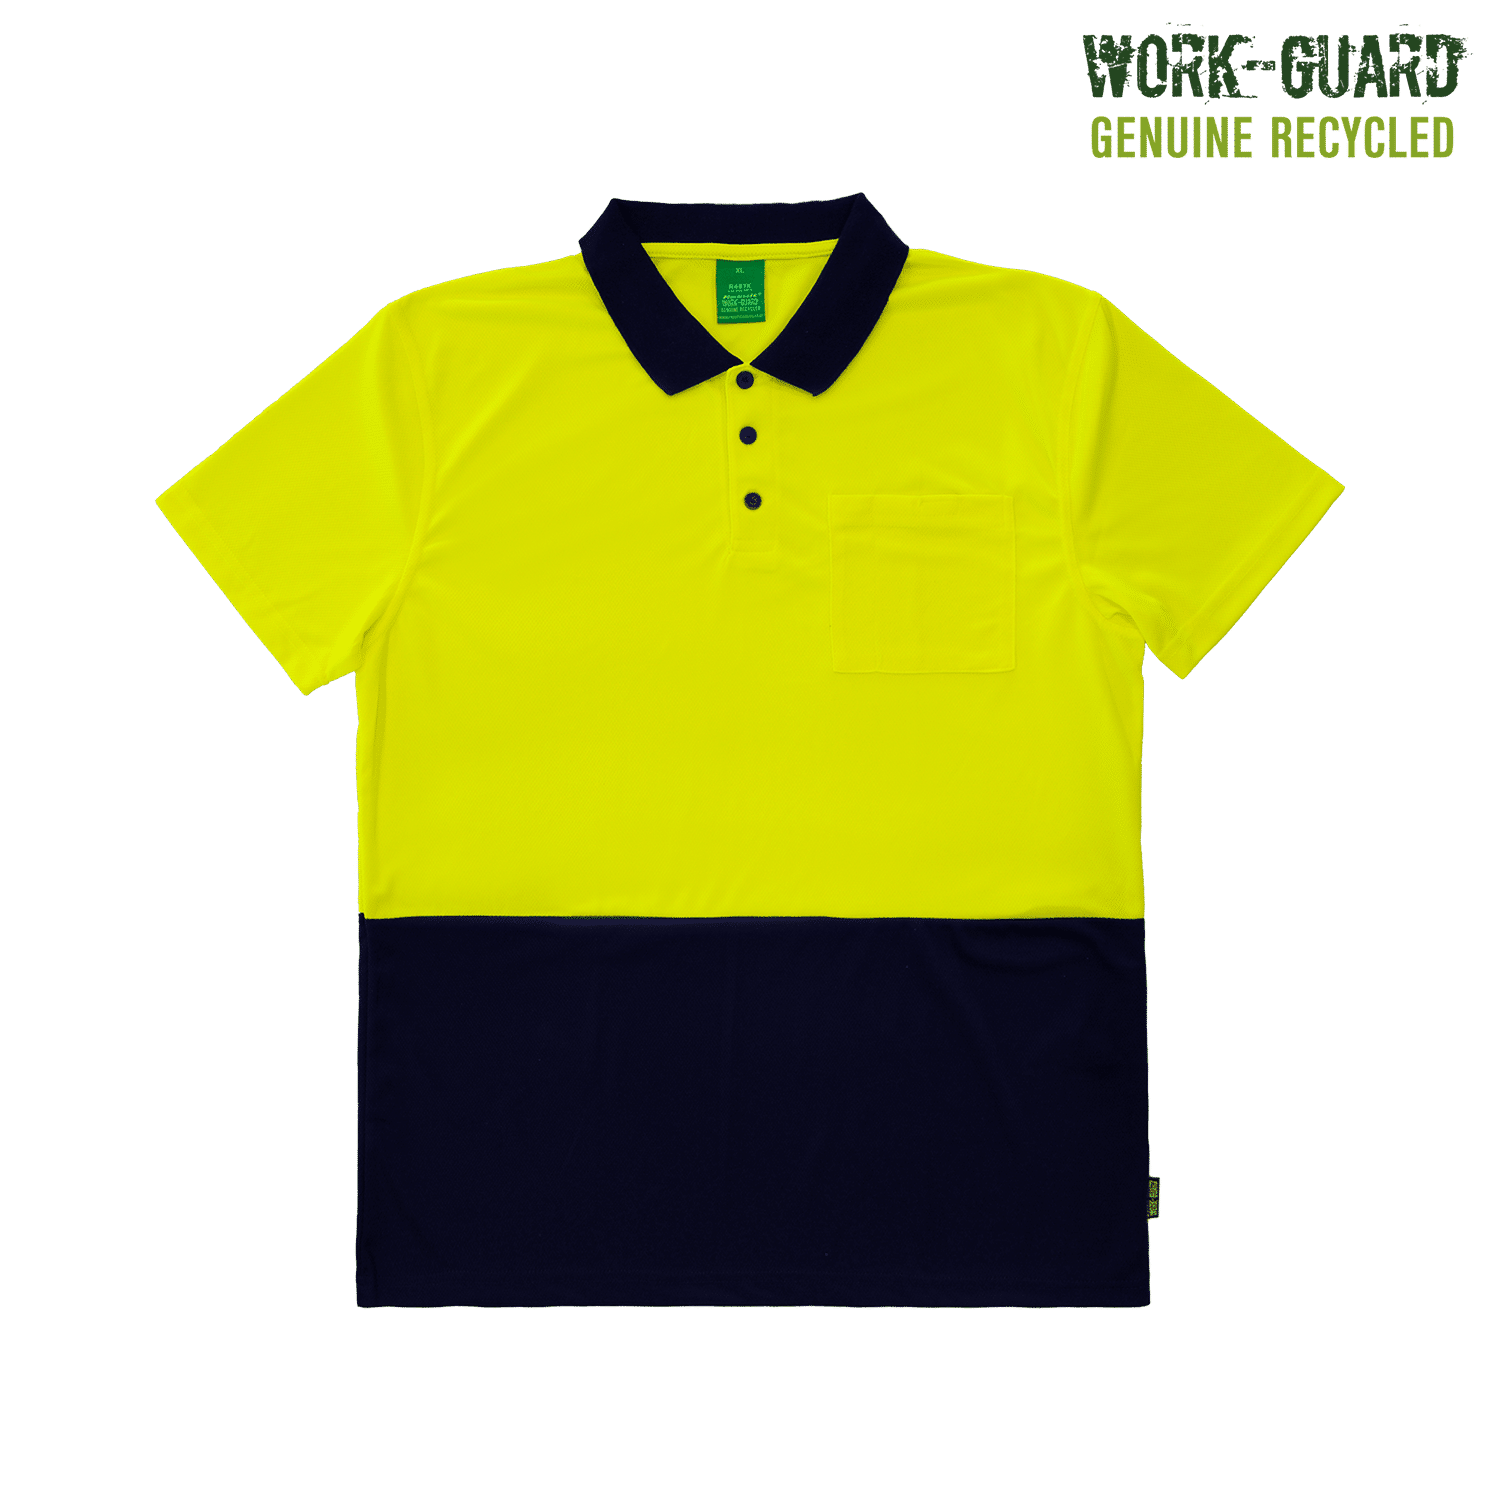 #colour_Safety Yellow/Navy